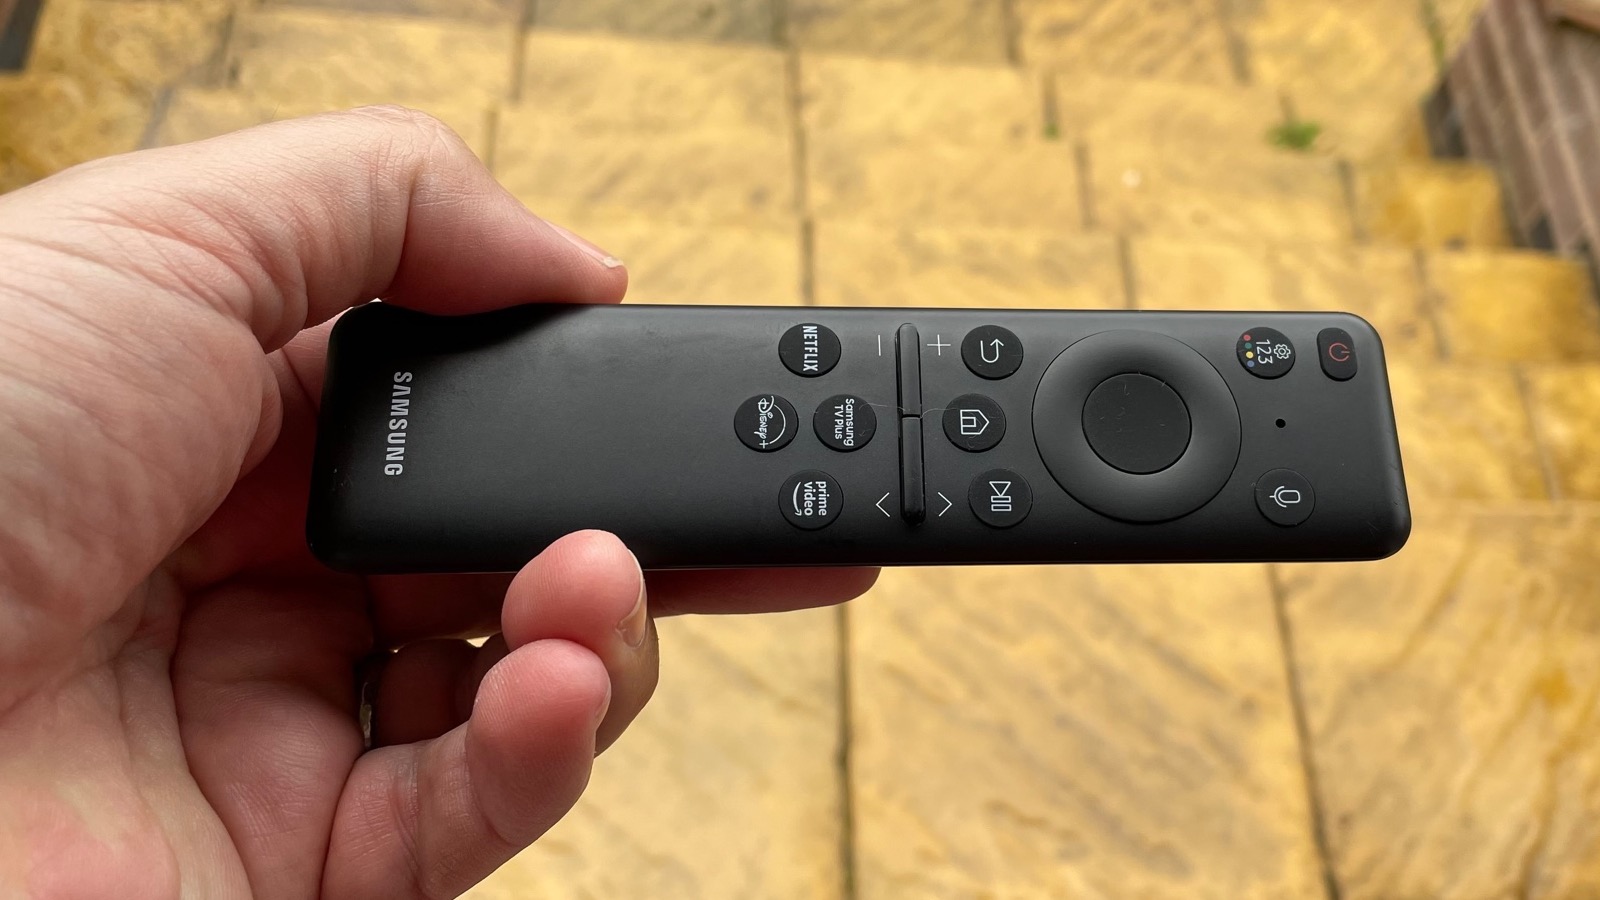 Samsung S90C remote held in a hand